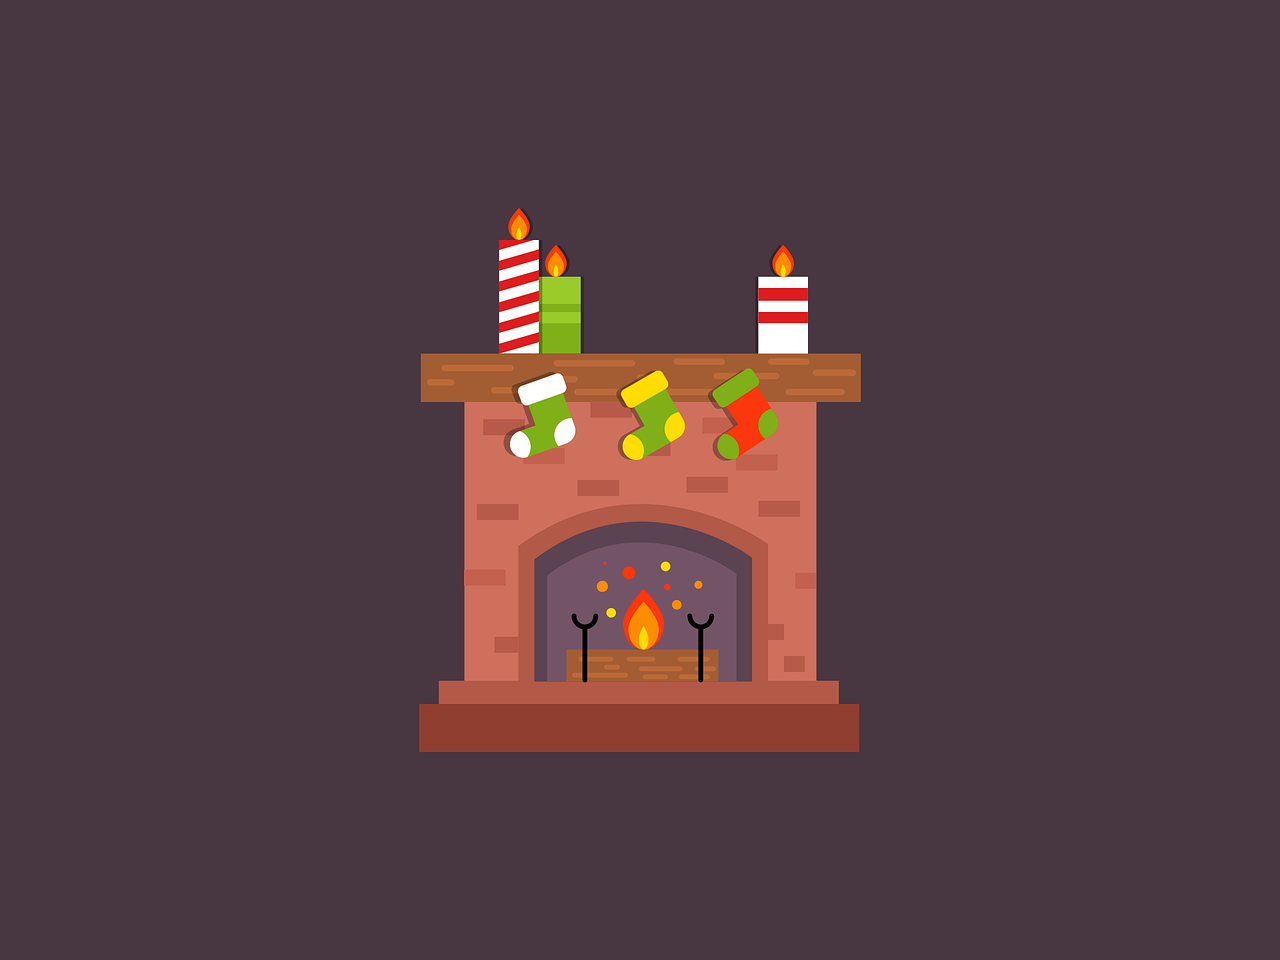 a fireplace with a bunch of candles on top of it, shutterstock contest winner, pixel art, dribbble illustration, snacks, simple 2d flat design, toys